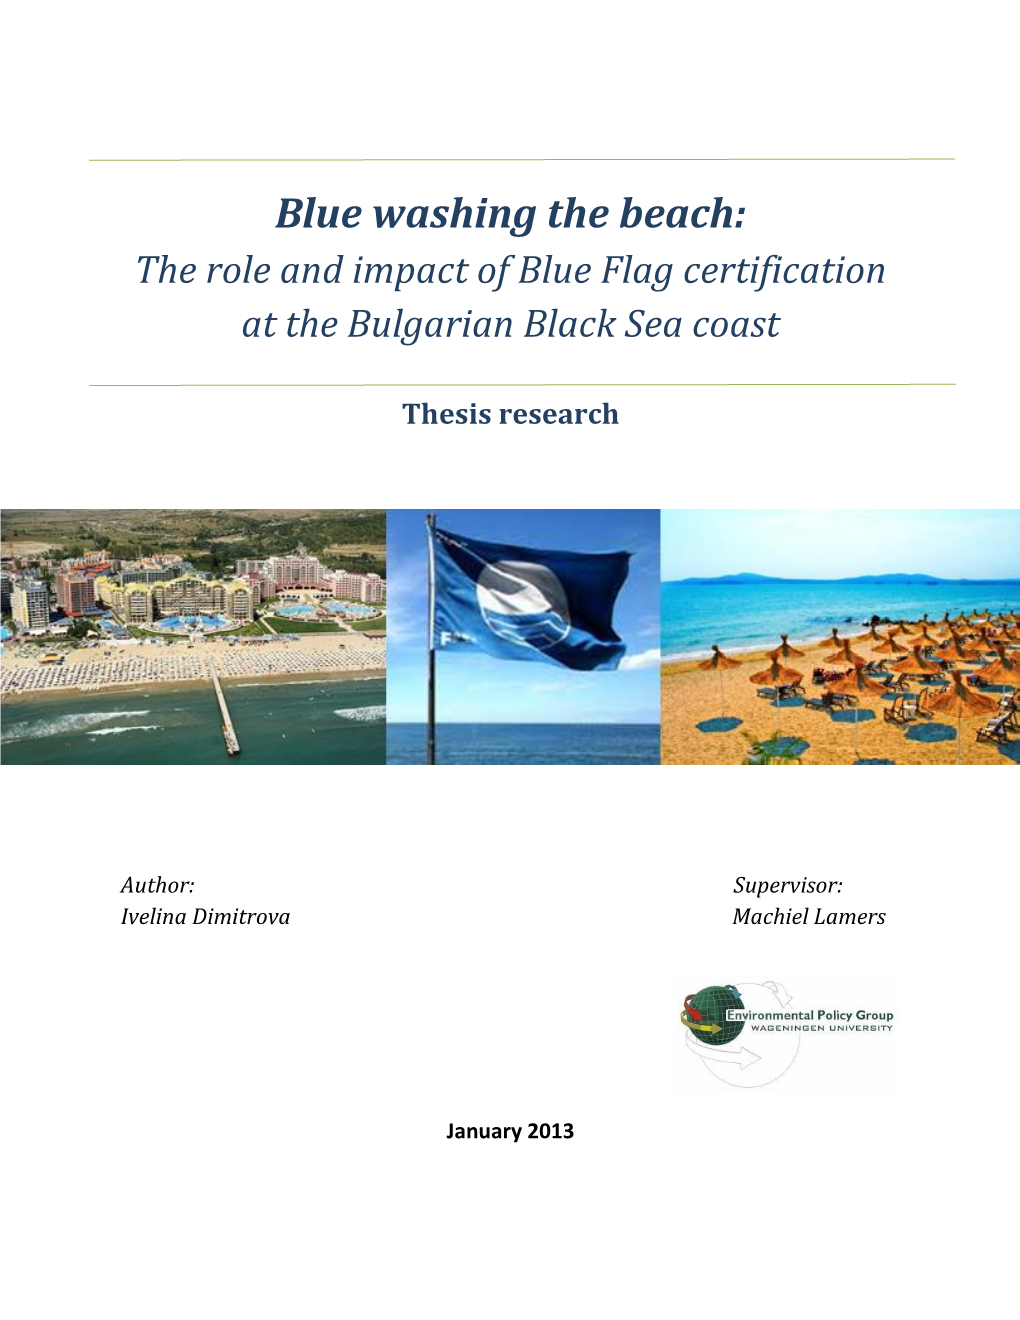 Blue Washing the Beach: the Role and Impact of Blue Flag Certification at the Bulgarian Black Sea Coast